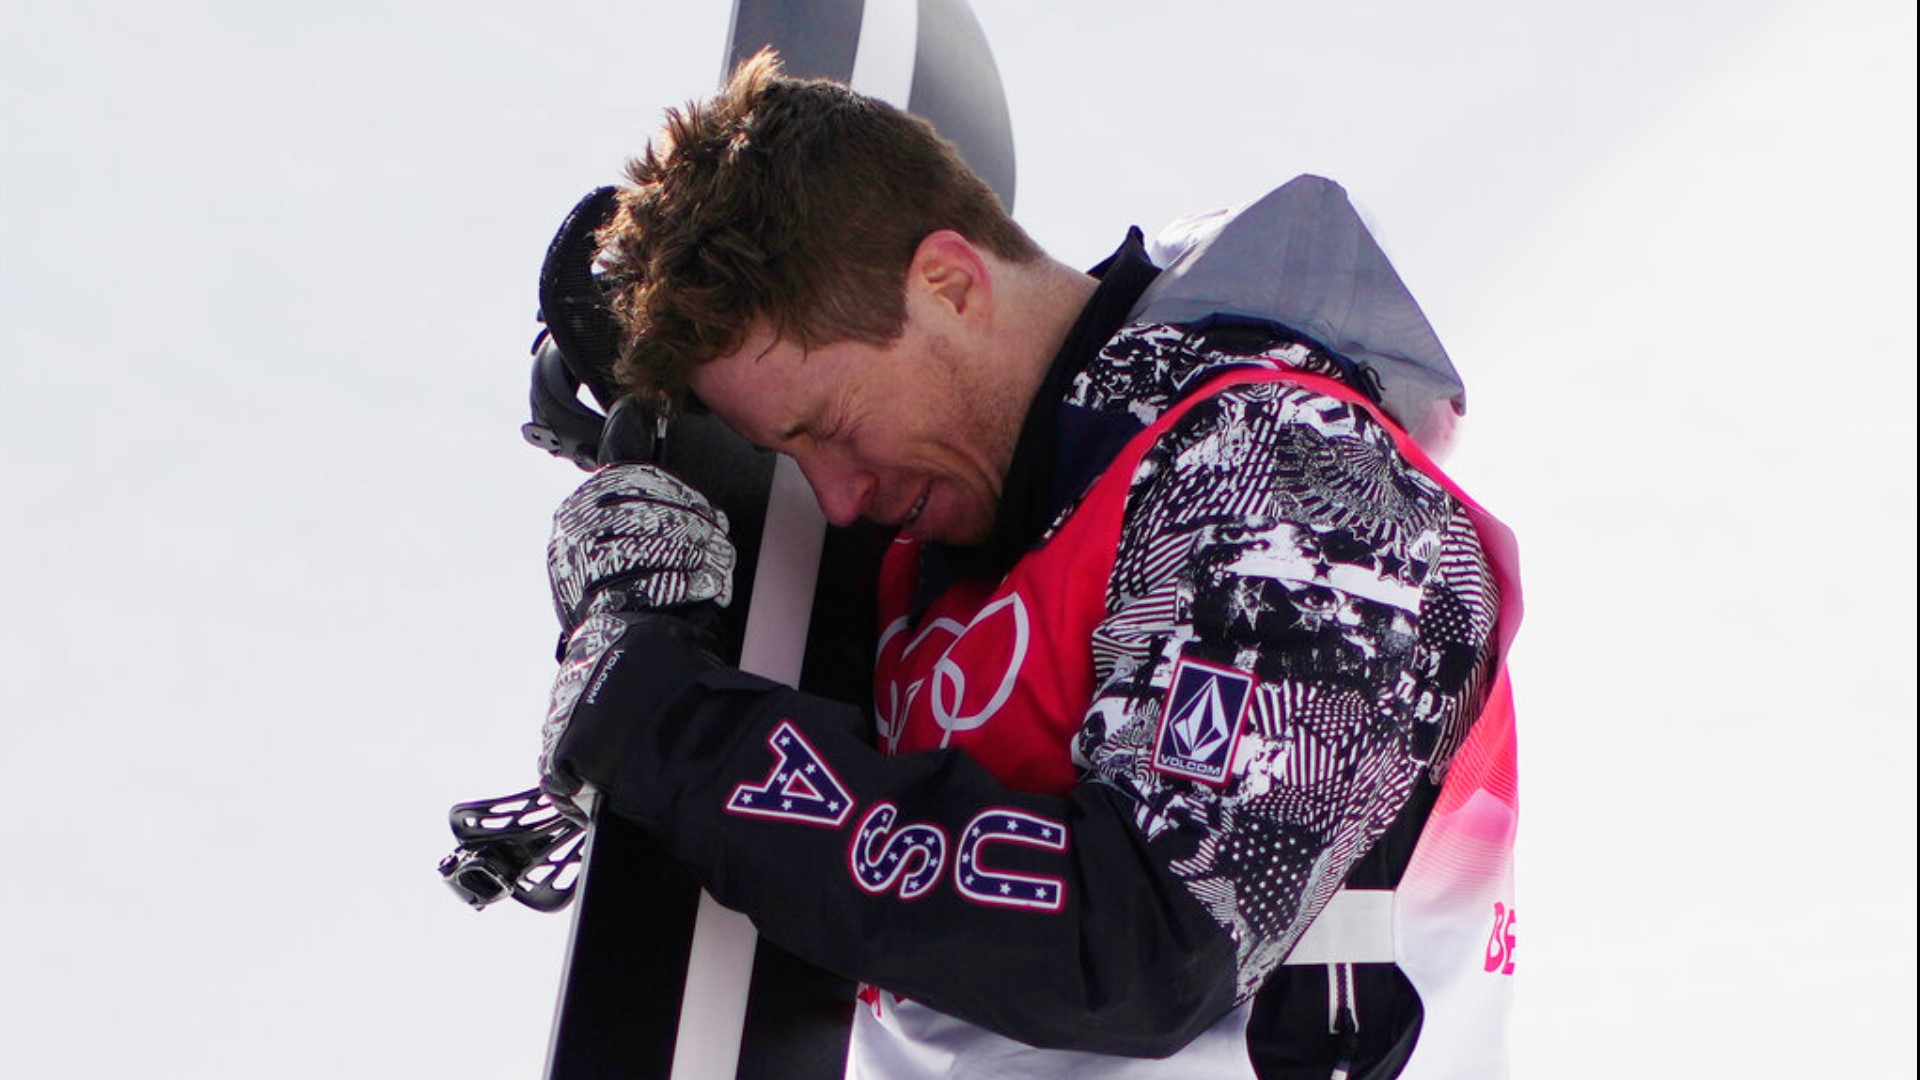 Shaun White is retiring after a great performance in the sport he helped define.